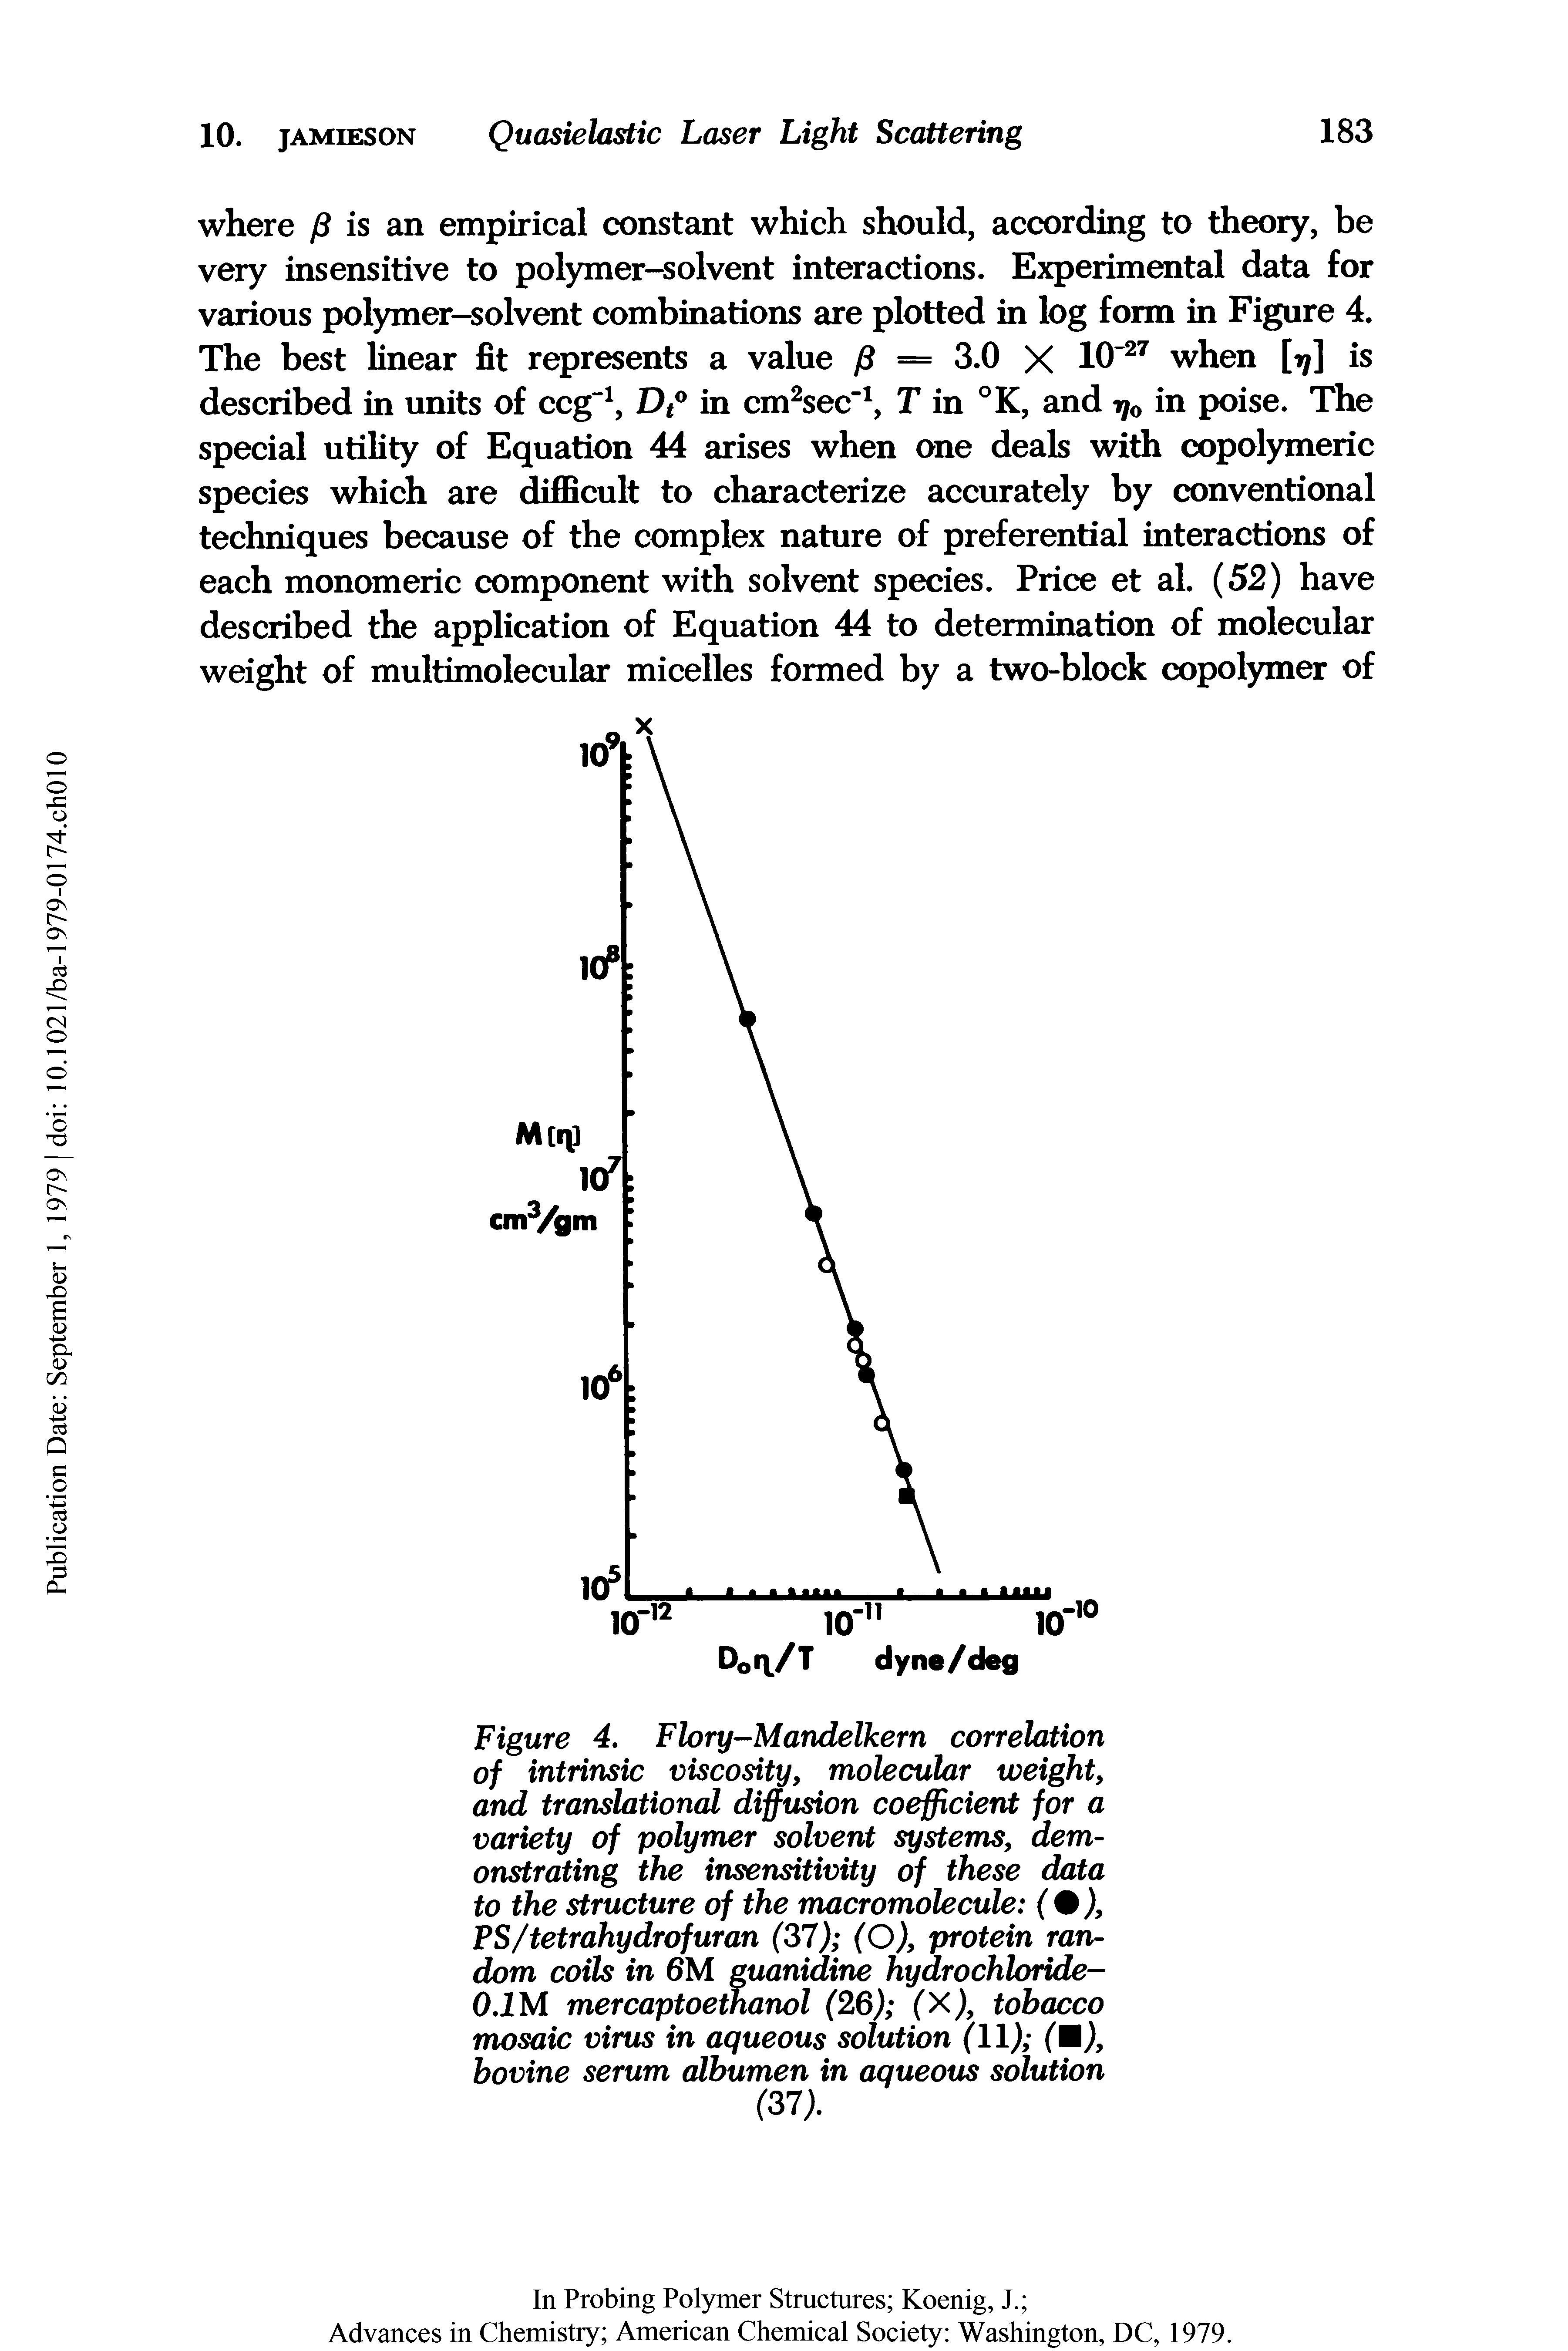 Figure 4. Flory-Mandelkern correlation of intrinsic viscosity, molecular weight, and translational diffusion coefficient for a variety of polymer solvent systems, demonstrating the insensitivity of these data to the structure of the macromolecule ( X PS/tetrahydrofuran (37) (O), protein random coils in 6M guanidine hydrochloride-0,IM mercaptoethanol (26) (X), tobacco mosaic virus in aqueous solution (11) ( ), bovine serum albumen in aqueous solution (37).